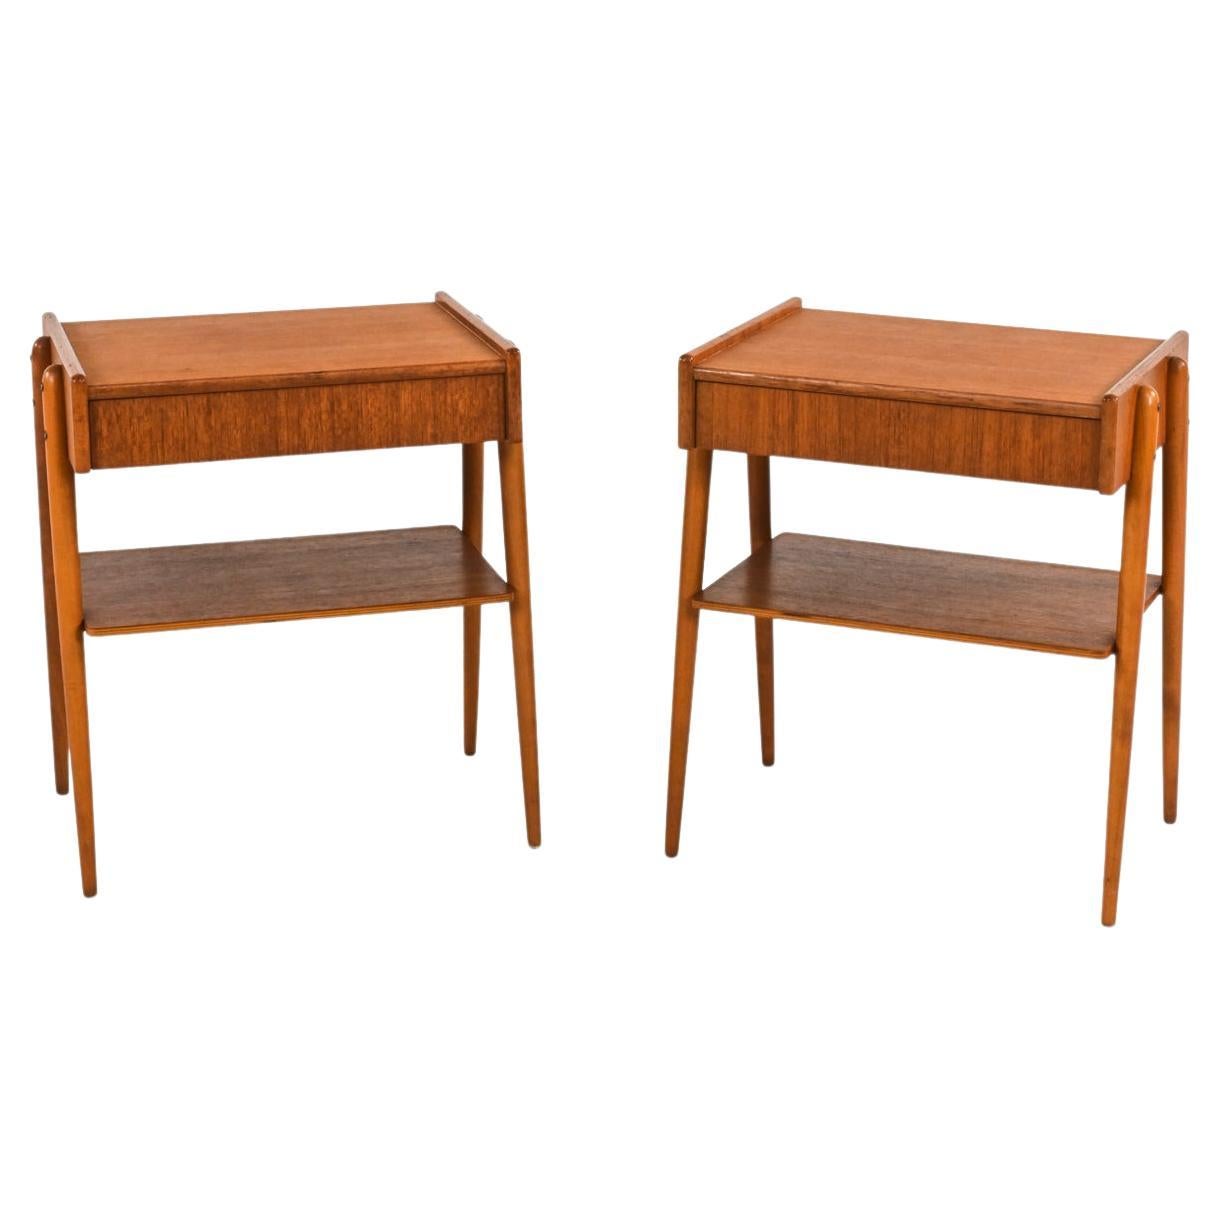 Pair of Swedish Mid-Century Teak Nightstands or End Tables by Carlstrom & Co.